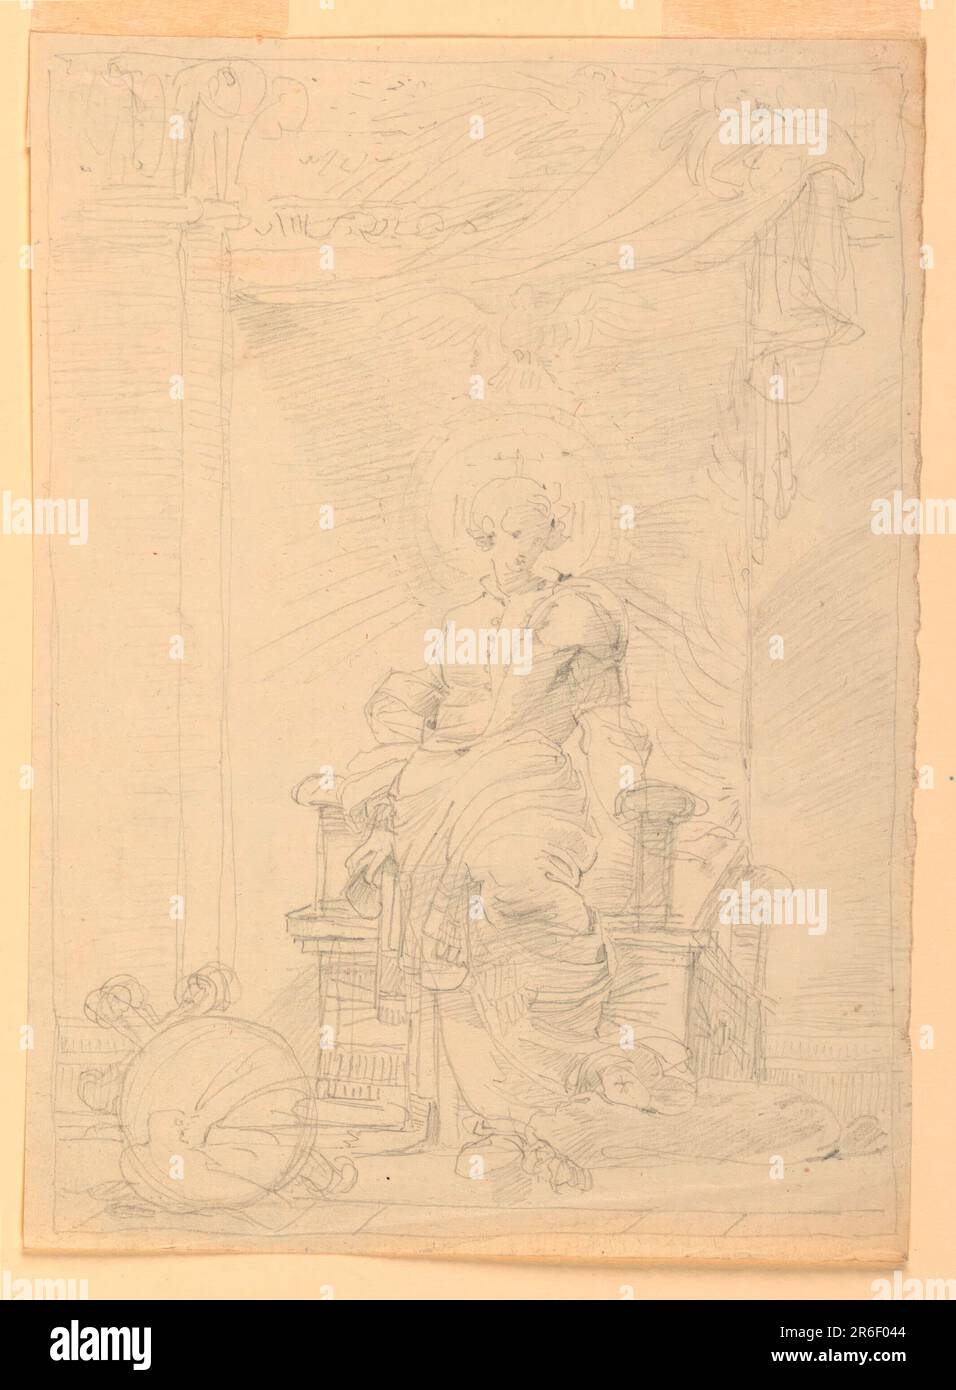 Sketch, Figure in Classical Throne with Attributes of Christianity or War. Graphite on paper. Date: 1820-1850. Museum: Cooper Hewitt, Smithsonian Design Museum. Stock Photo